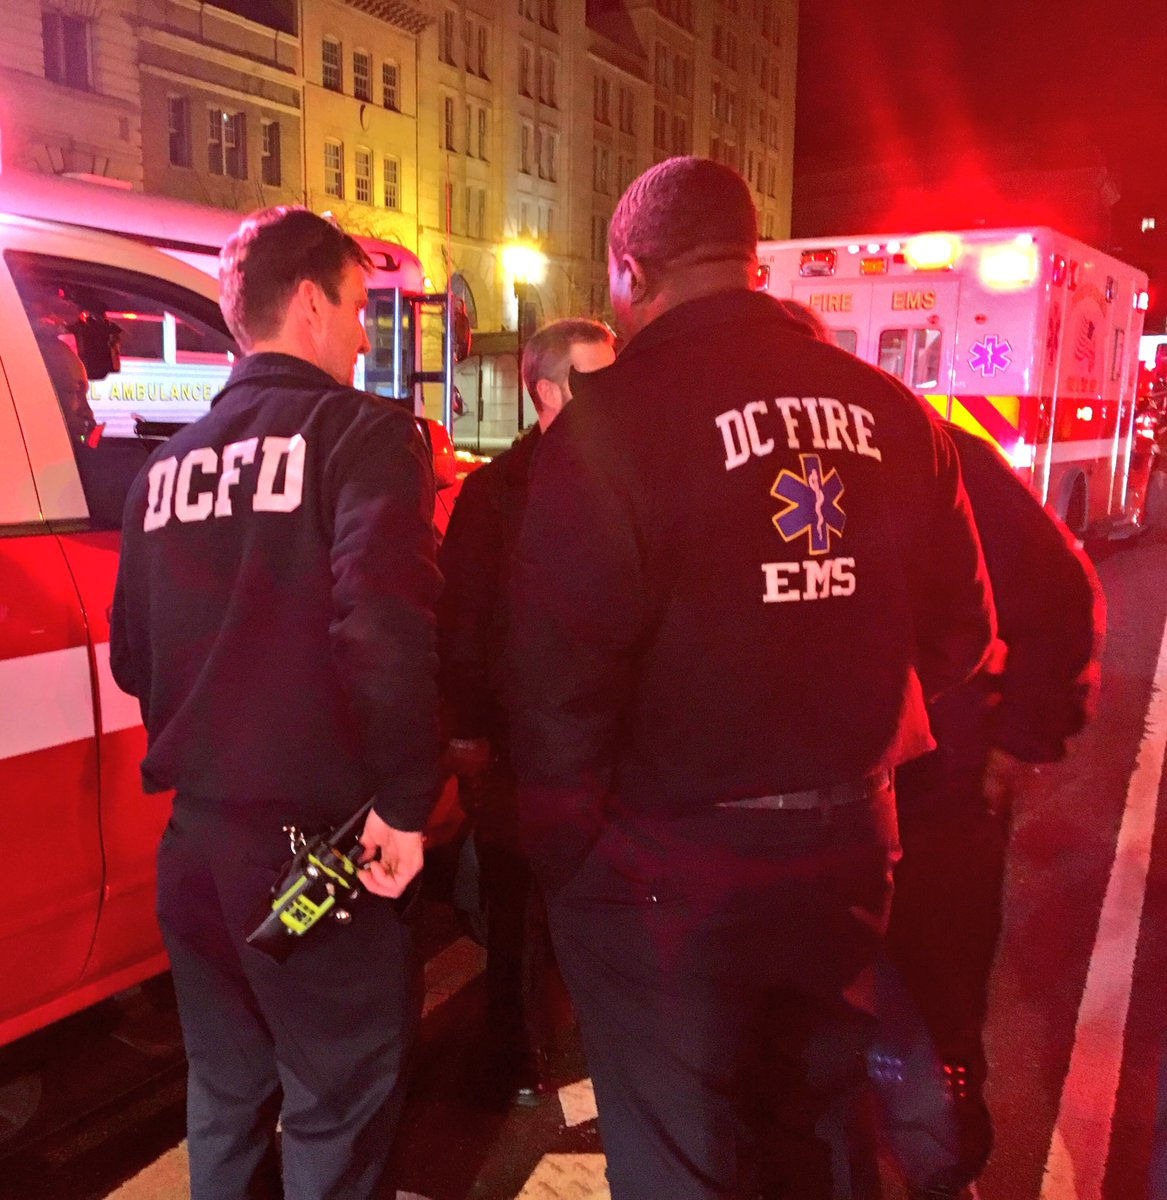 he group had been in New York, and some of them had shown symptoms before arriving, officials said. (Courtesy D.C. Fire and EMS)